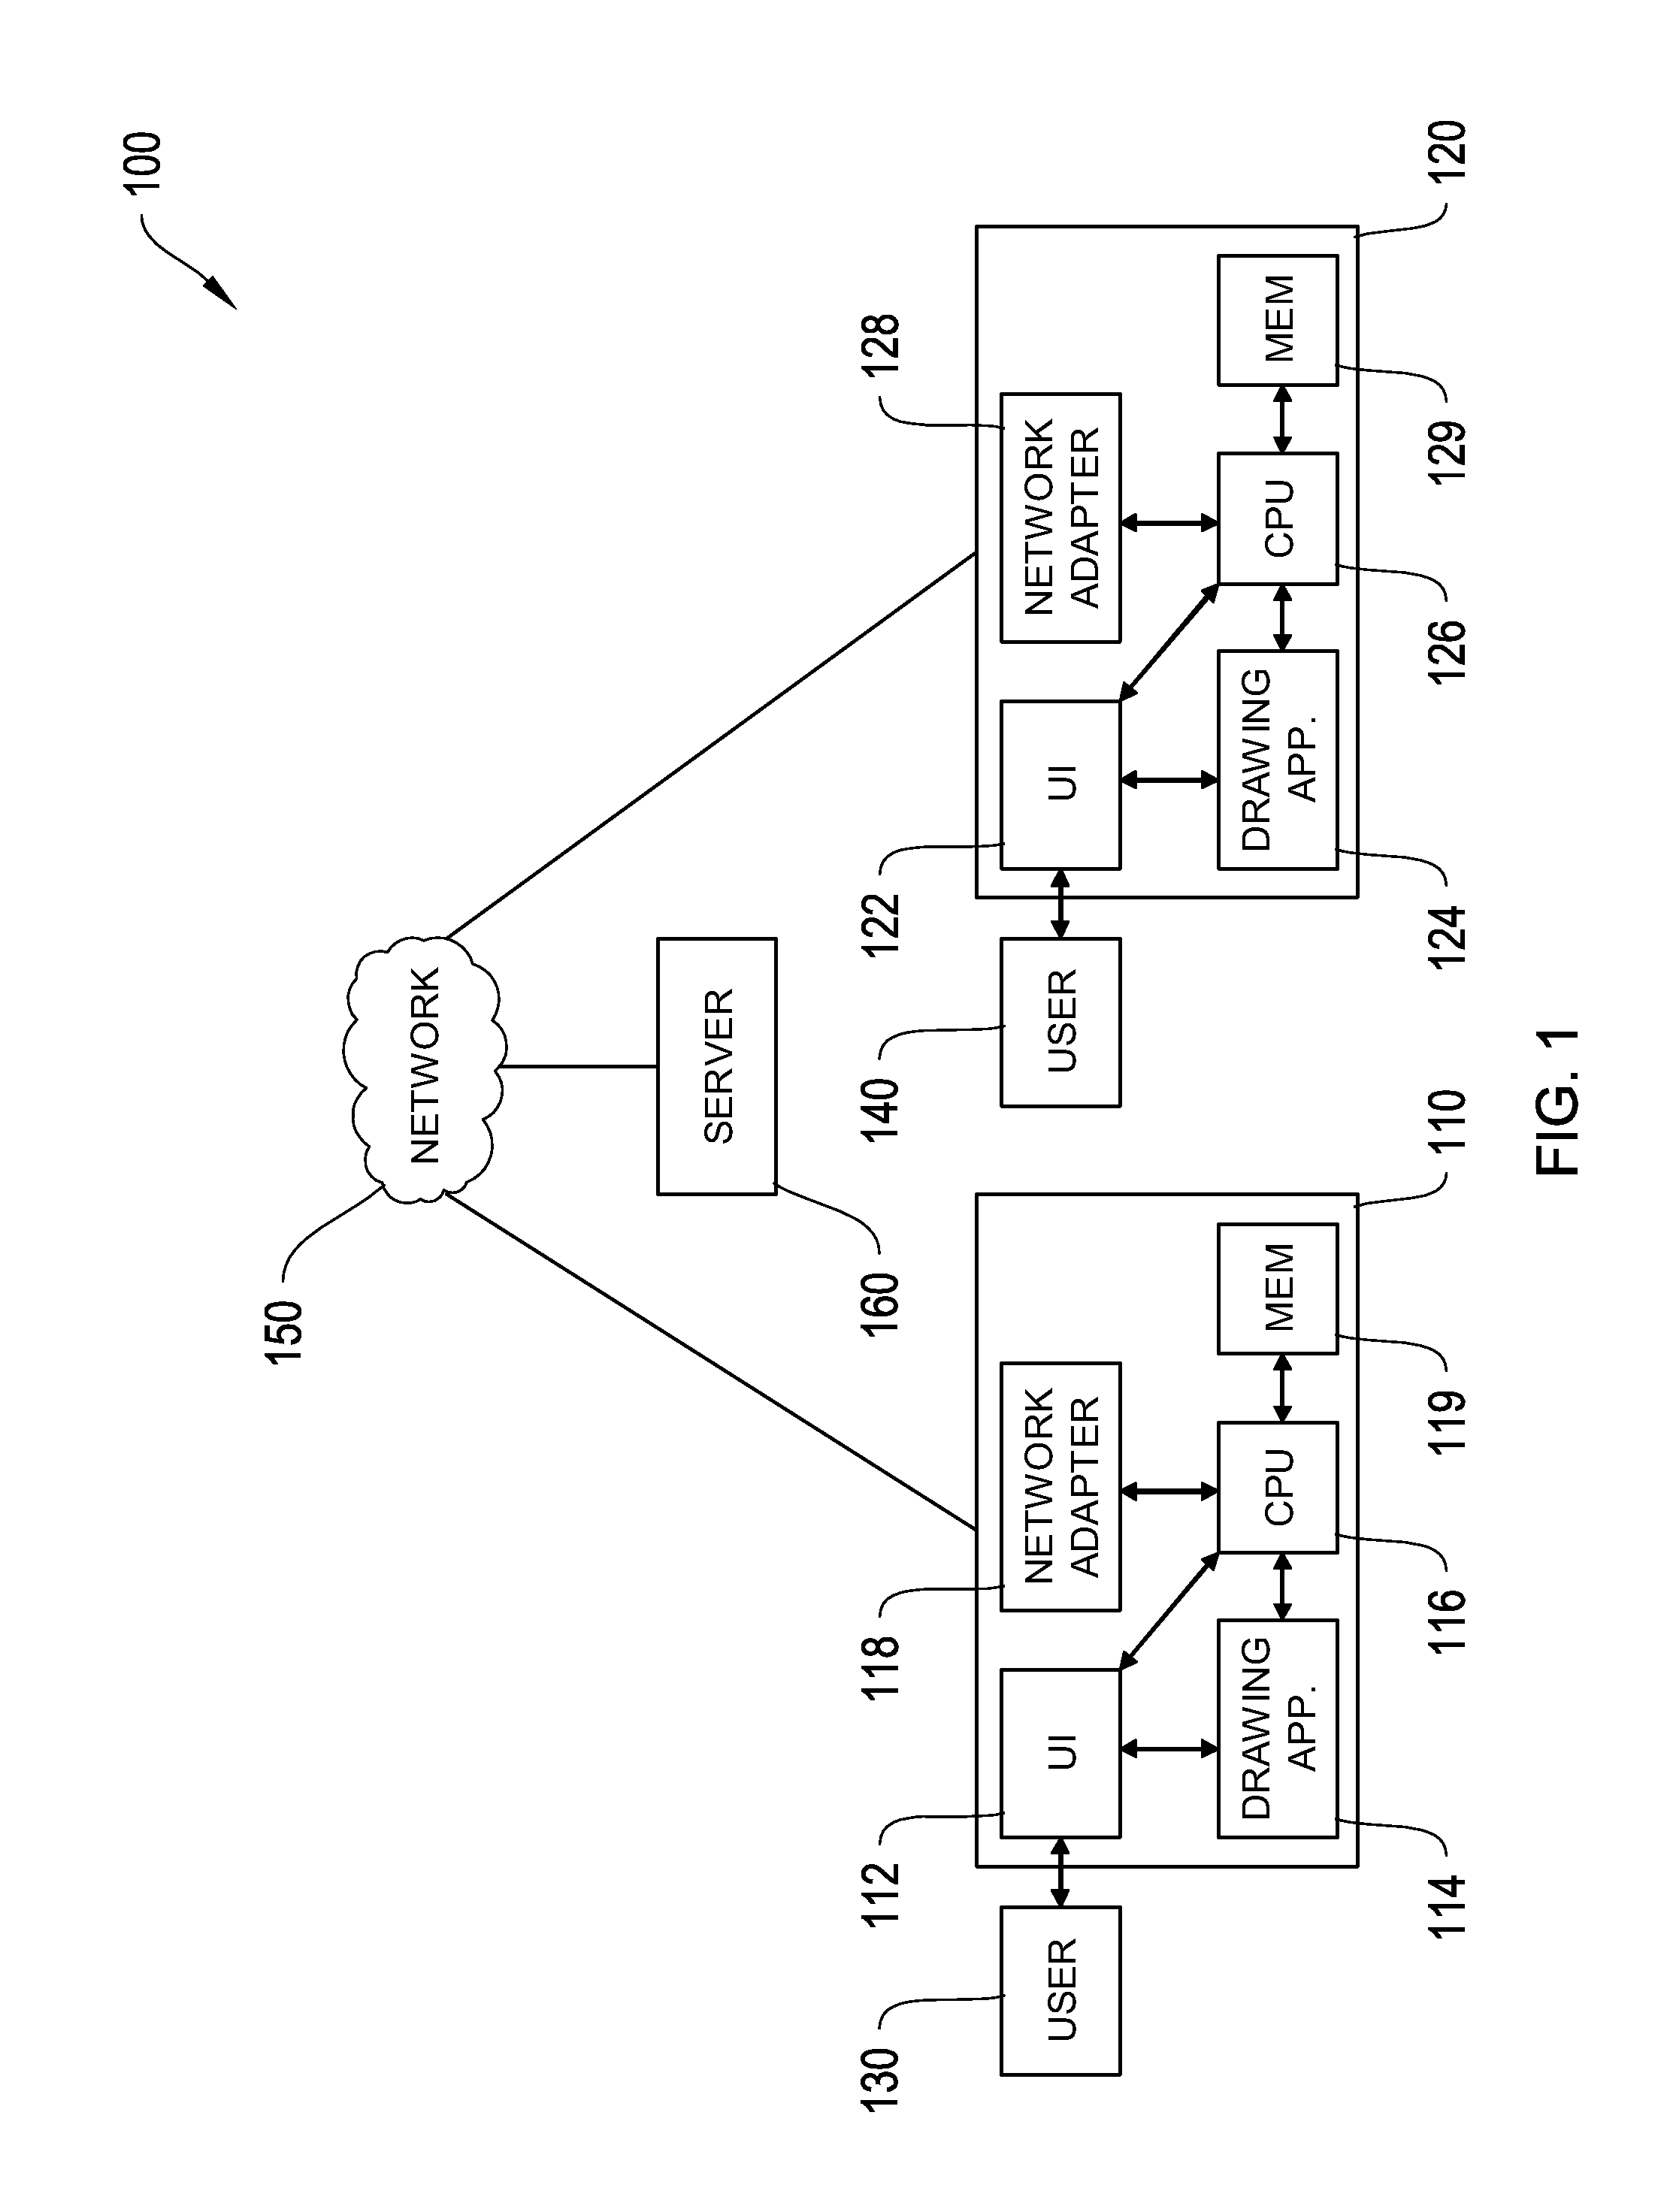 Systems and methods for animating collaborator modifications